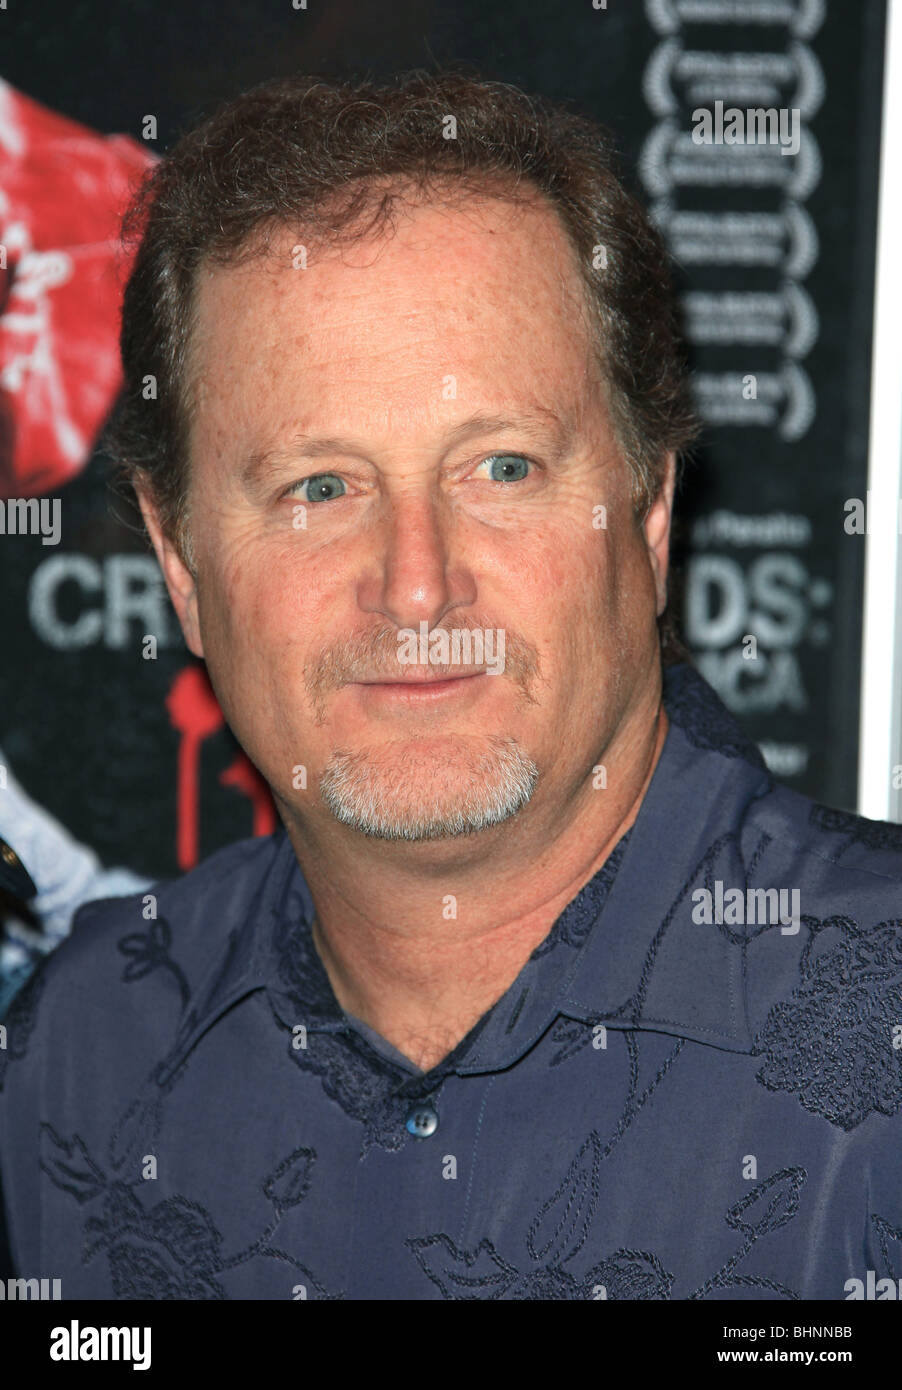 STACY PERALTA CRIPS AND BLOODS: MADE IN AMERICA LOS ANGELES PREMIERE WEST HOLLYWOOD LOS ANGELES CA USA 10 February 2009 Stock Photo